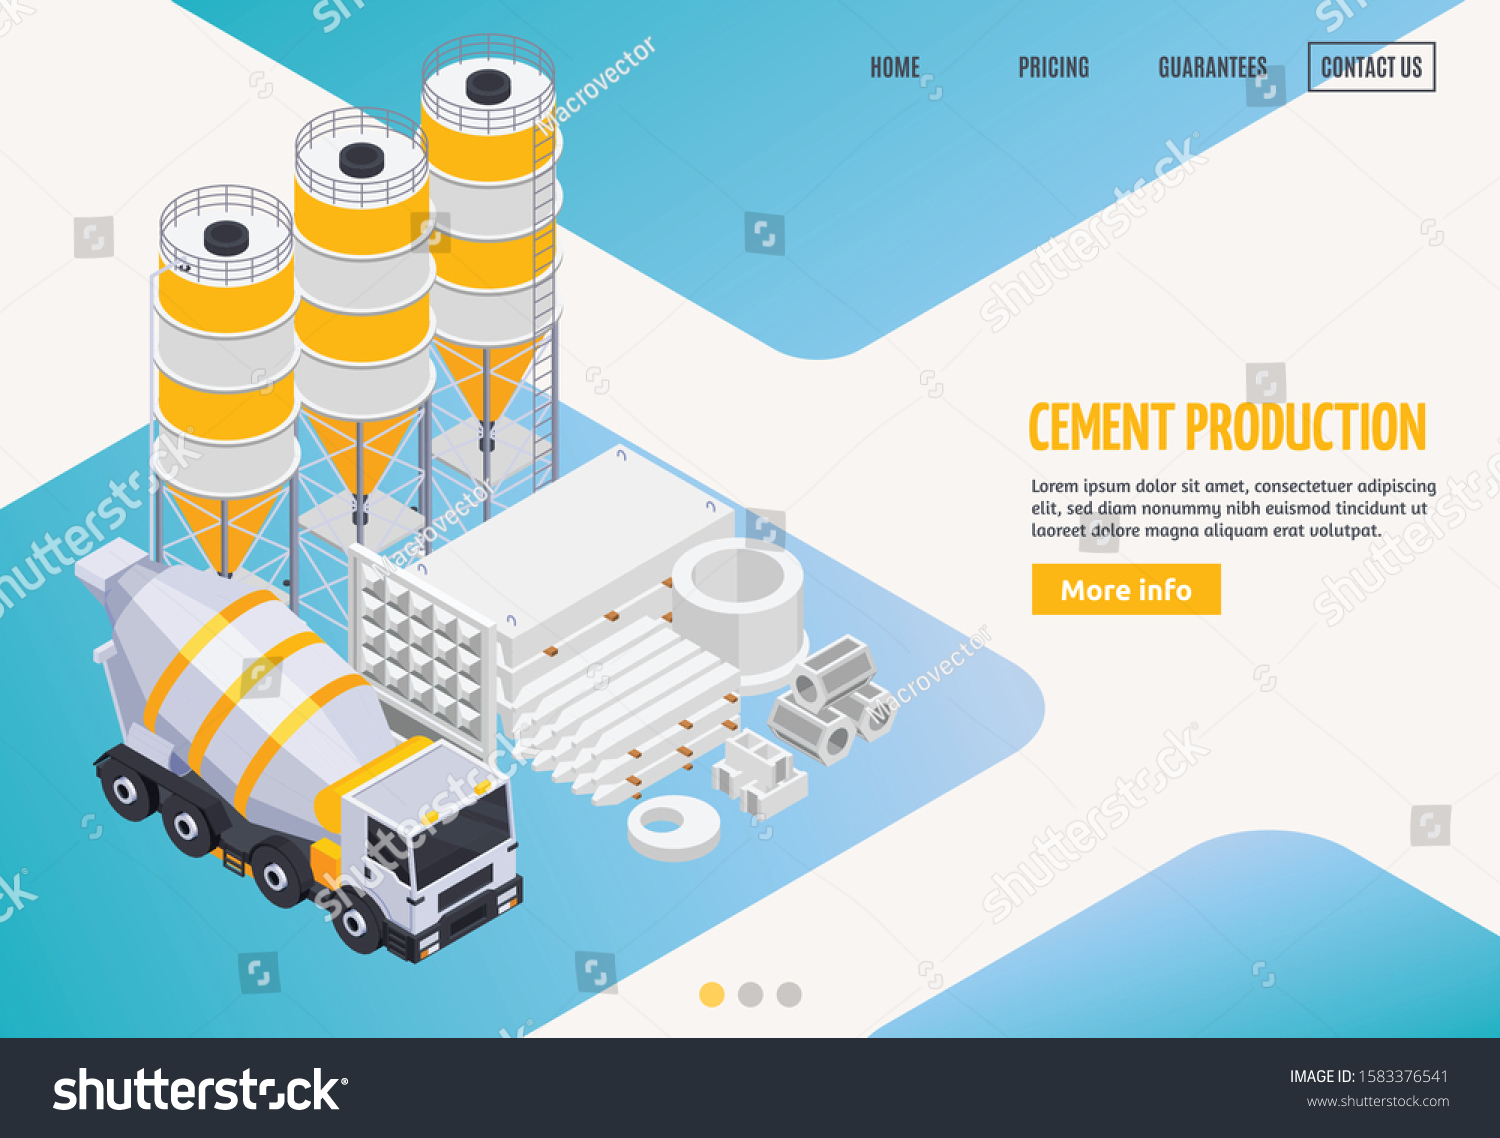 SVG of Concrete cement production isometric landing web site page with more info button clickable links and images vector illustration svg